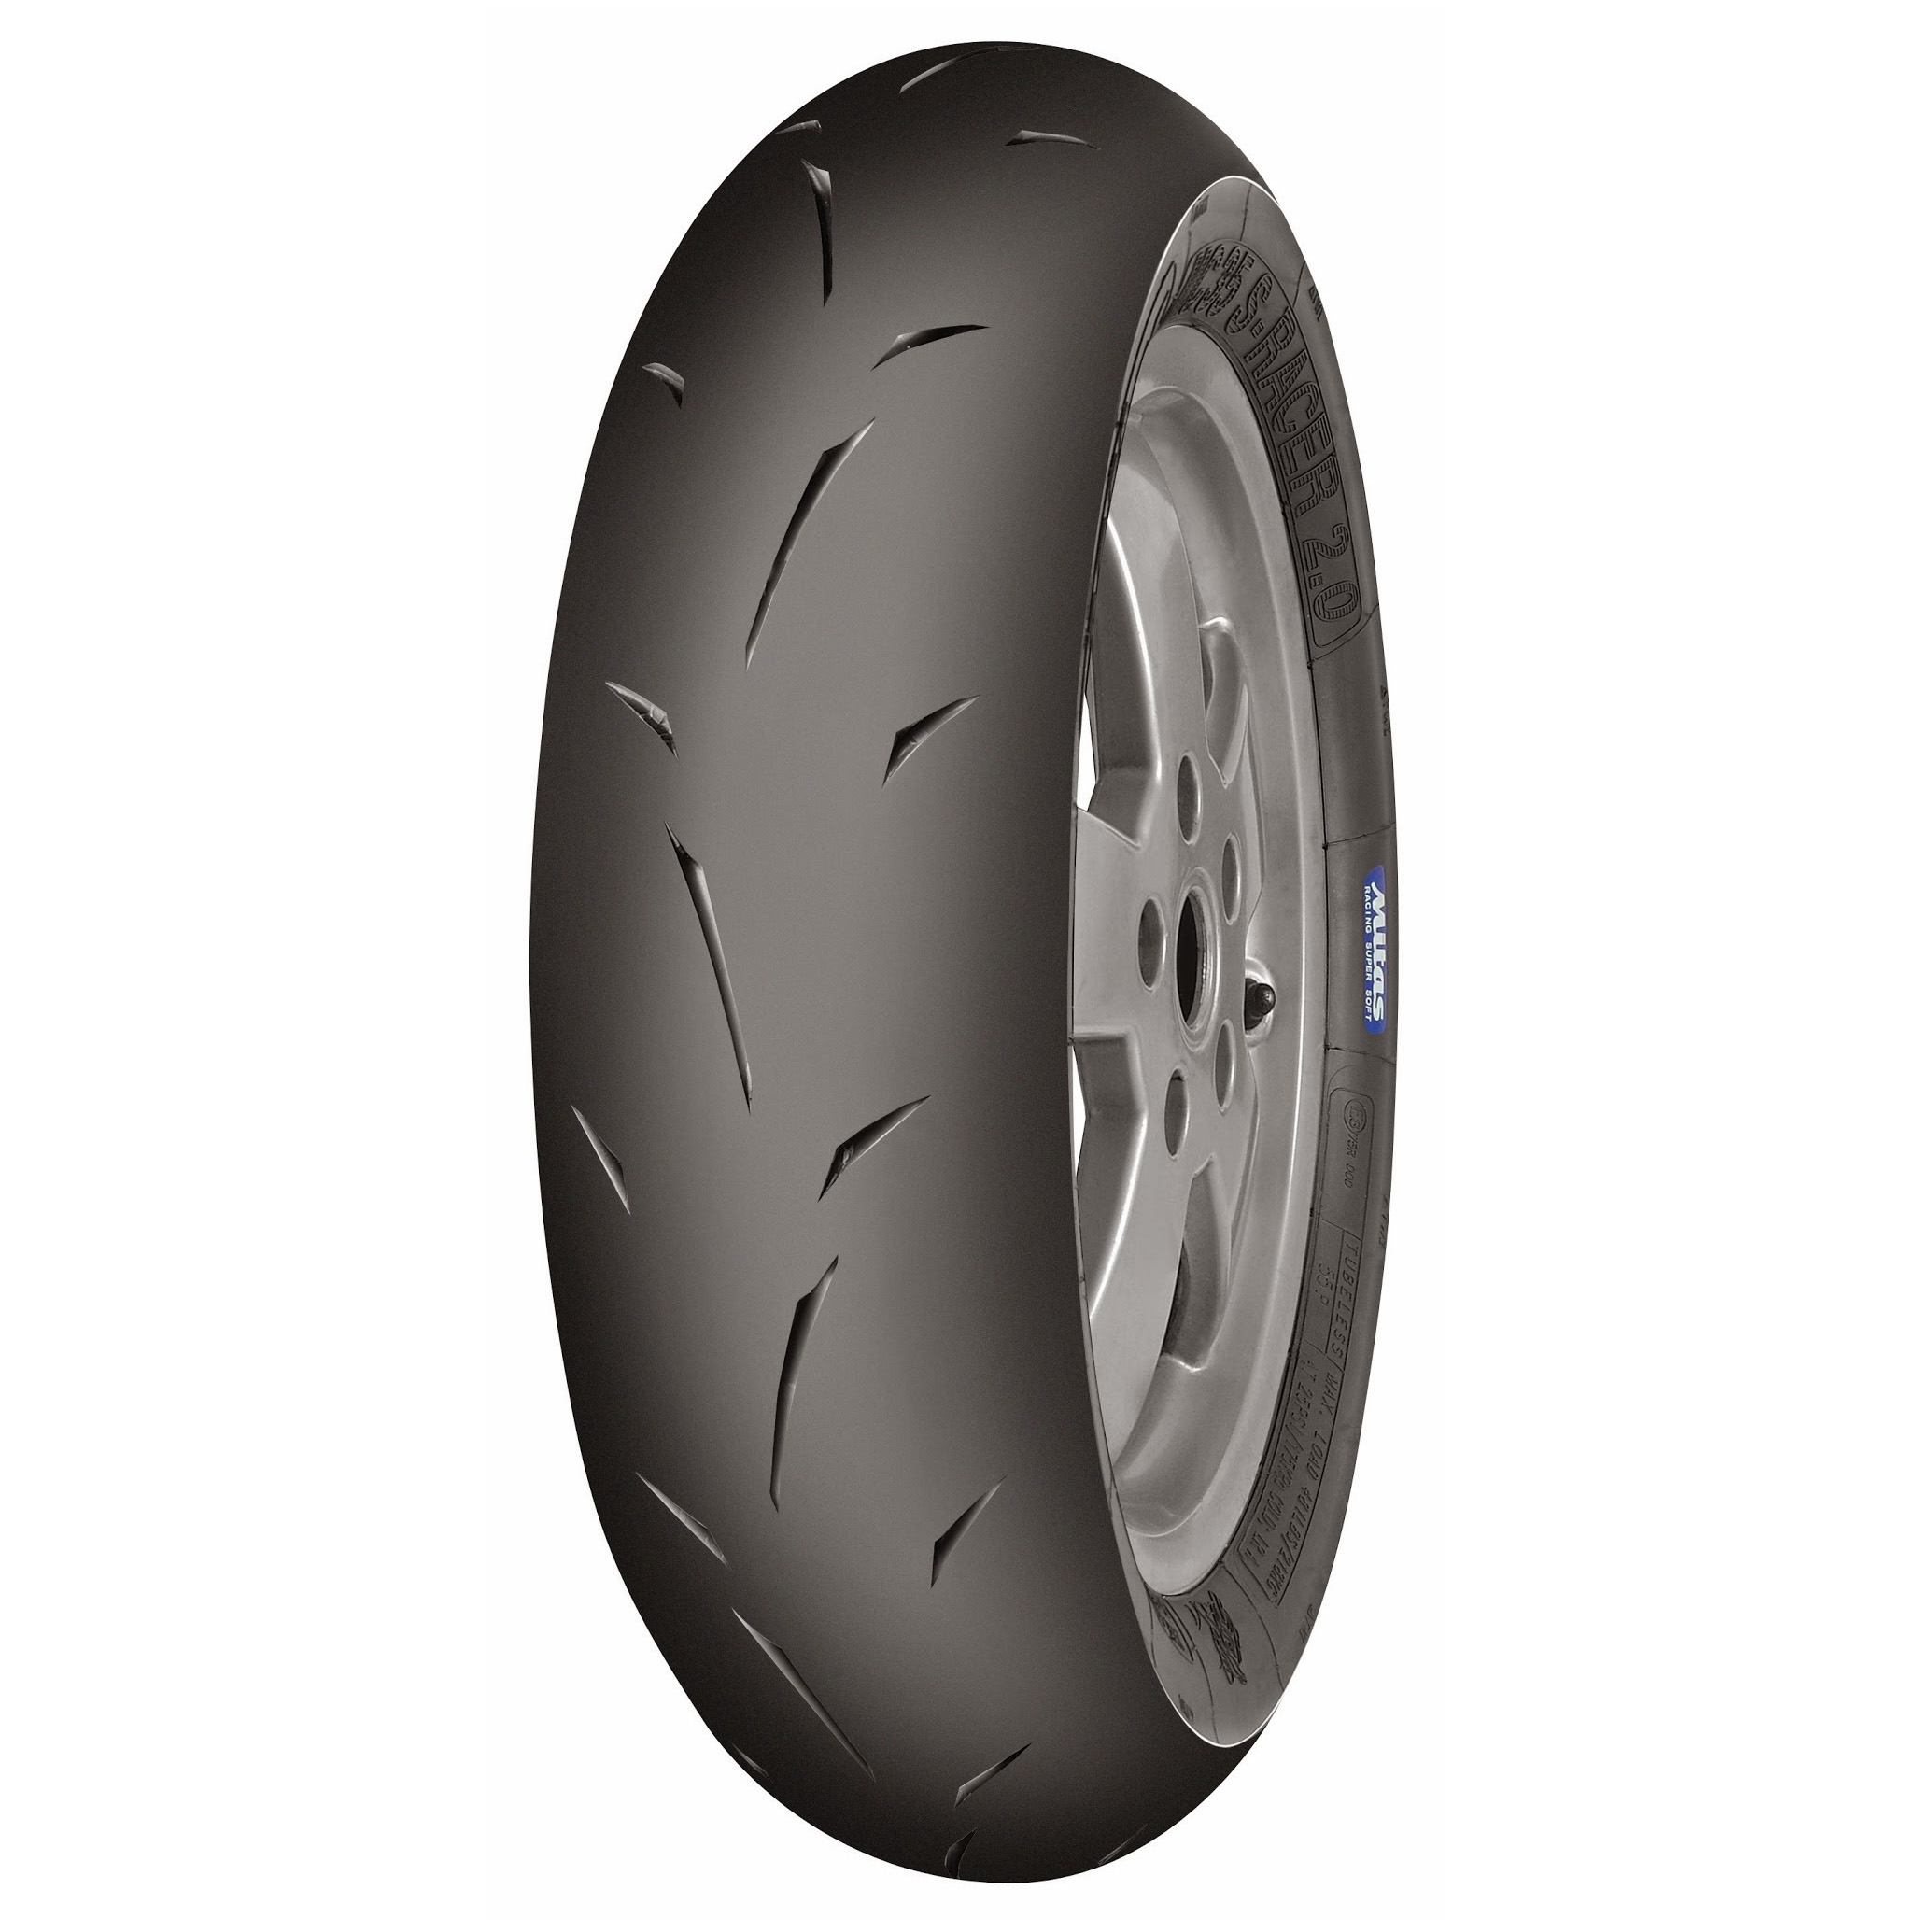 Gomme Nuove Goodyear 255/45 R19 104V U.GRIP PERFORM. + FP T0 XL M+S pneumatici nuovi Invernale